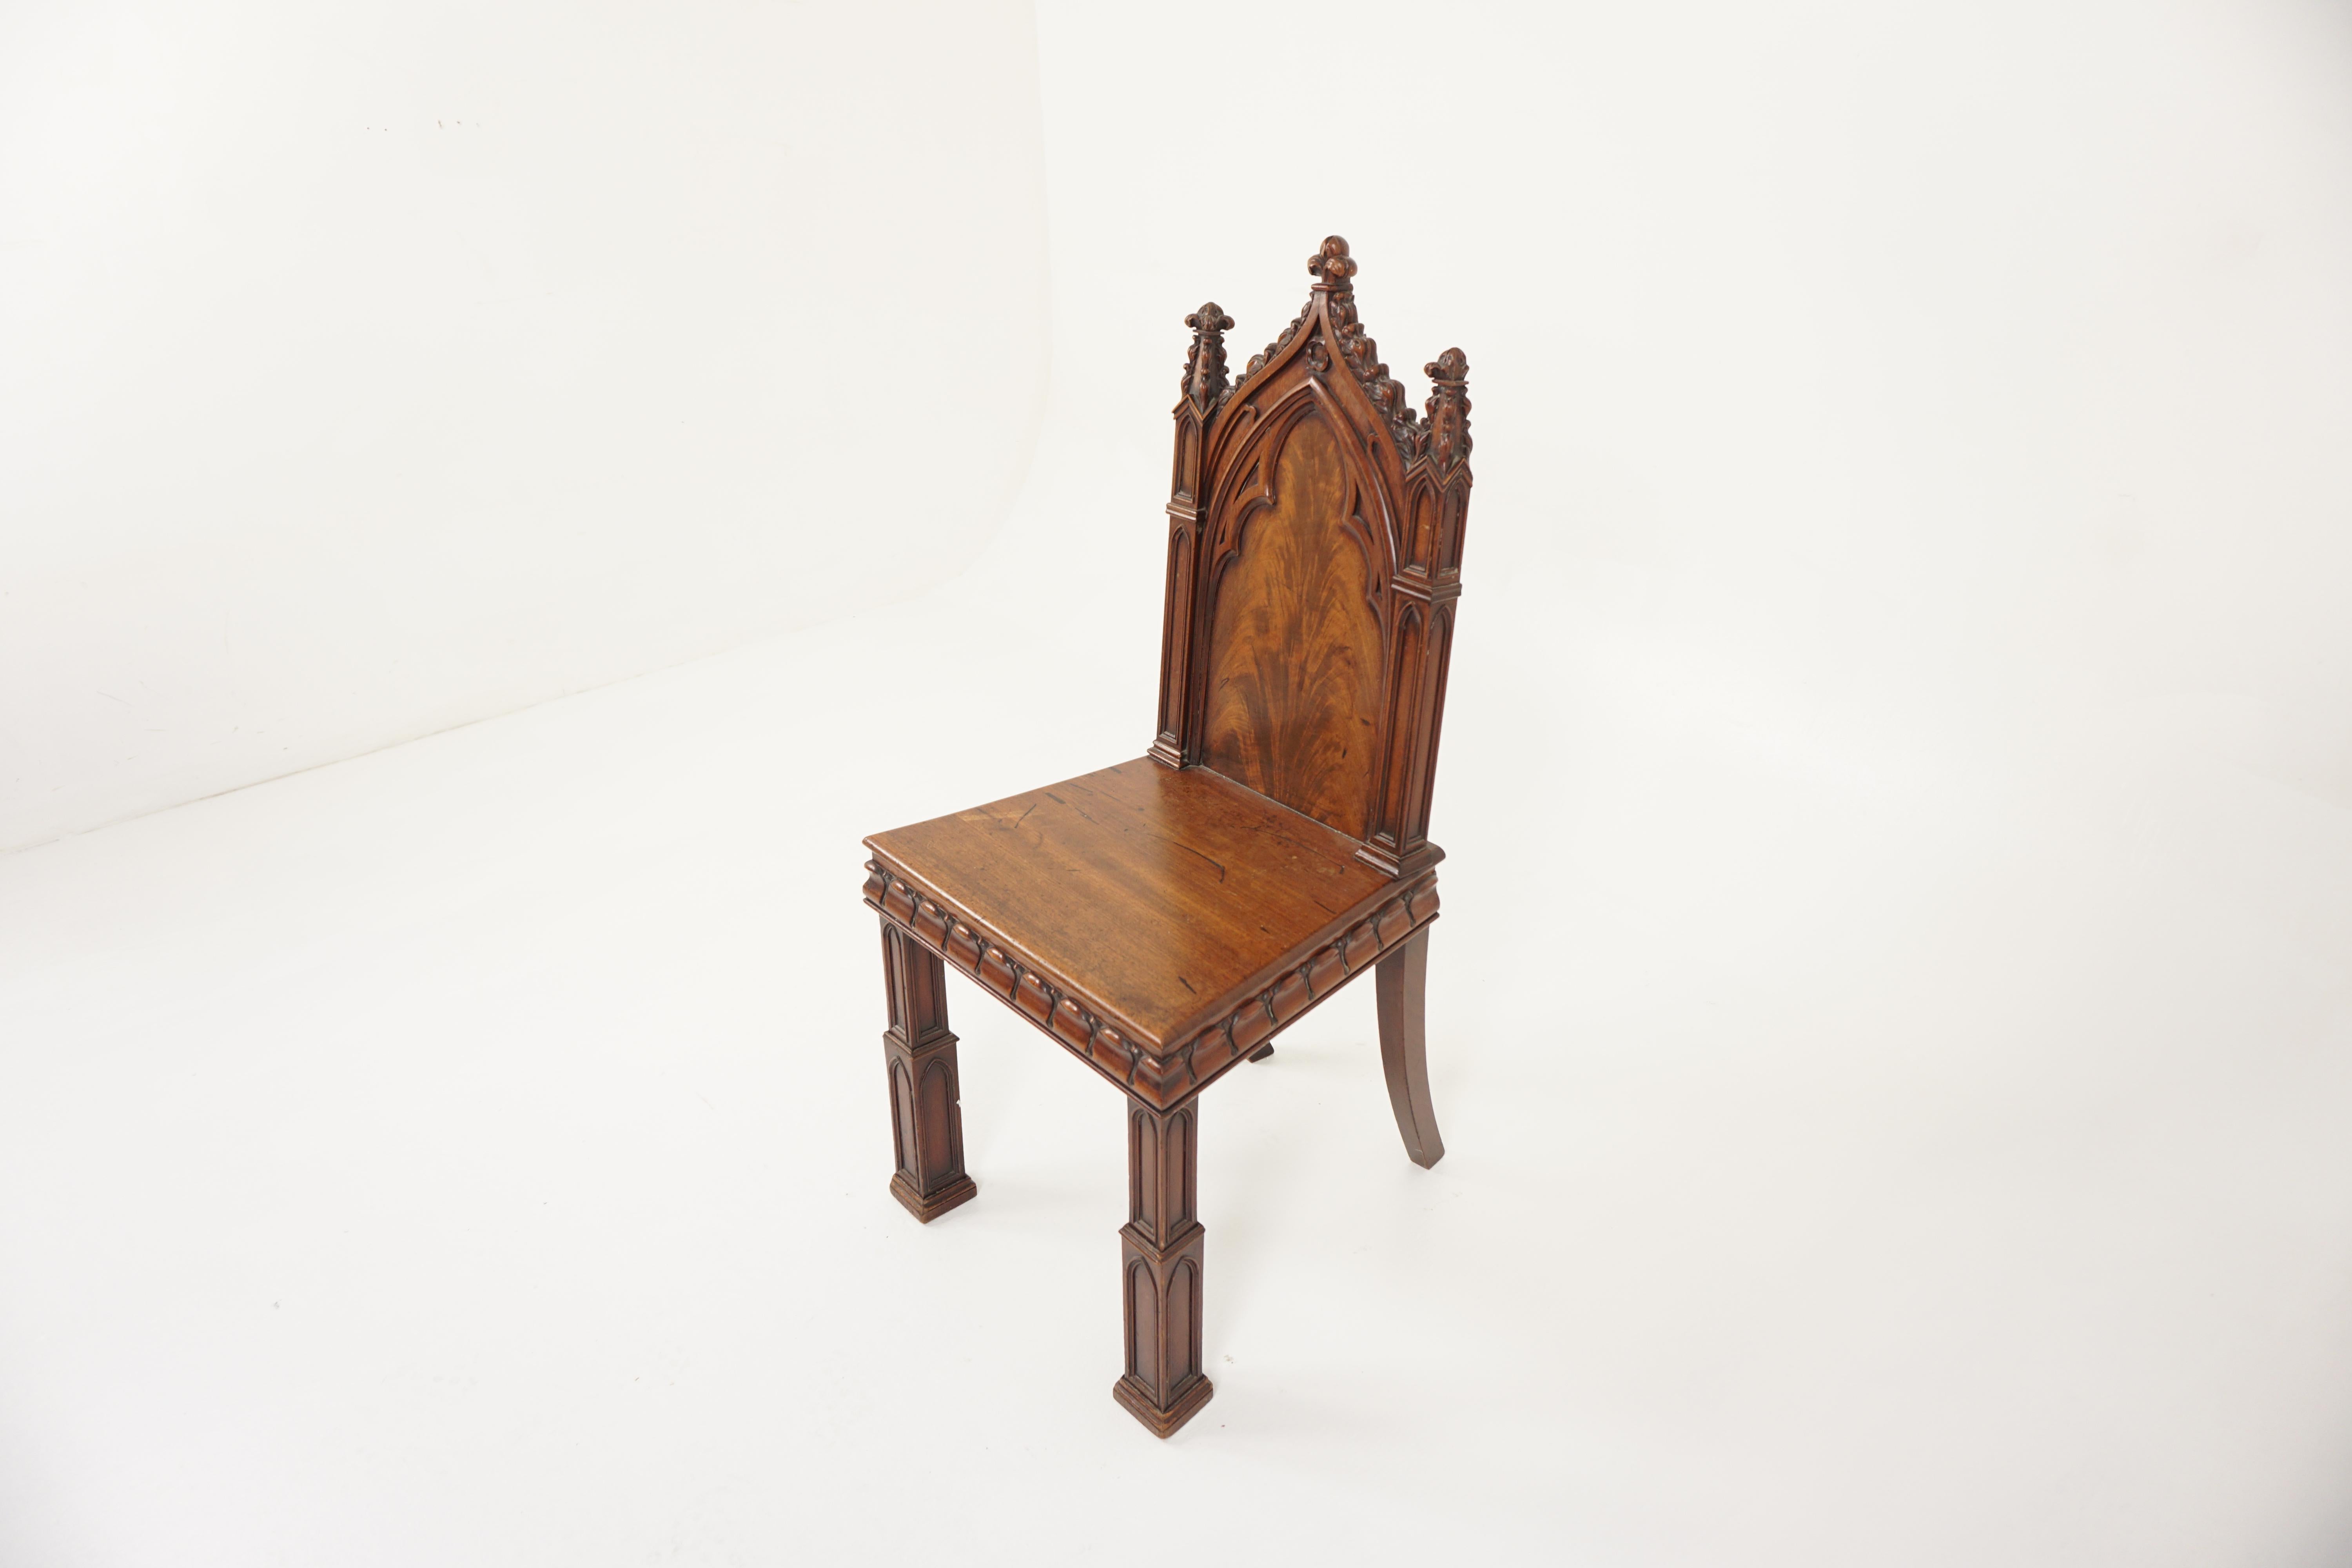 Ant. Victorian Gothic Solid Walnut Carved Church Chair, Scotland 1880, H941

Scotland 1880
Solid Walnut
Original finish
Shaped carved steeple back with carved finials on side supports and top
Solid Panelled back shaped solid wooden